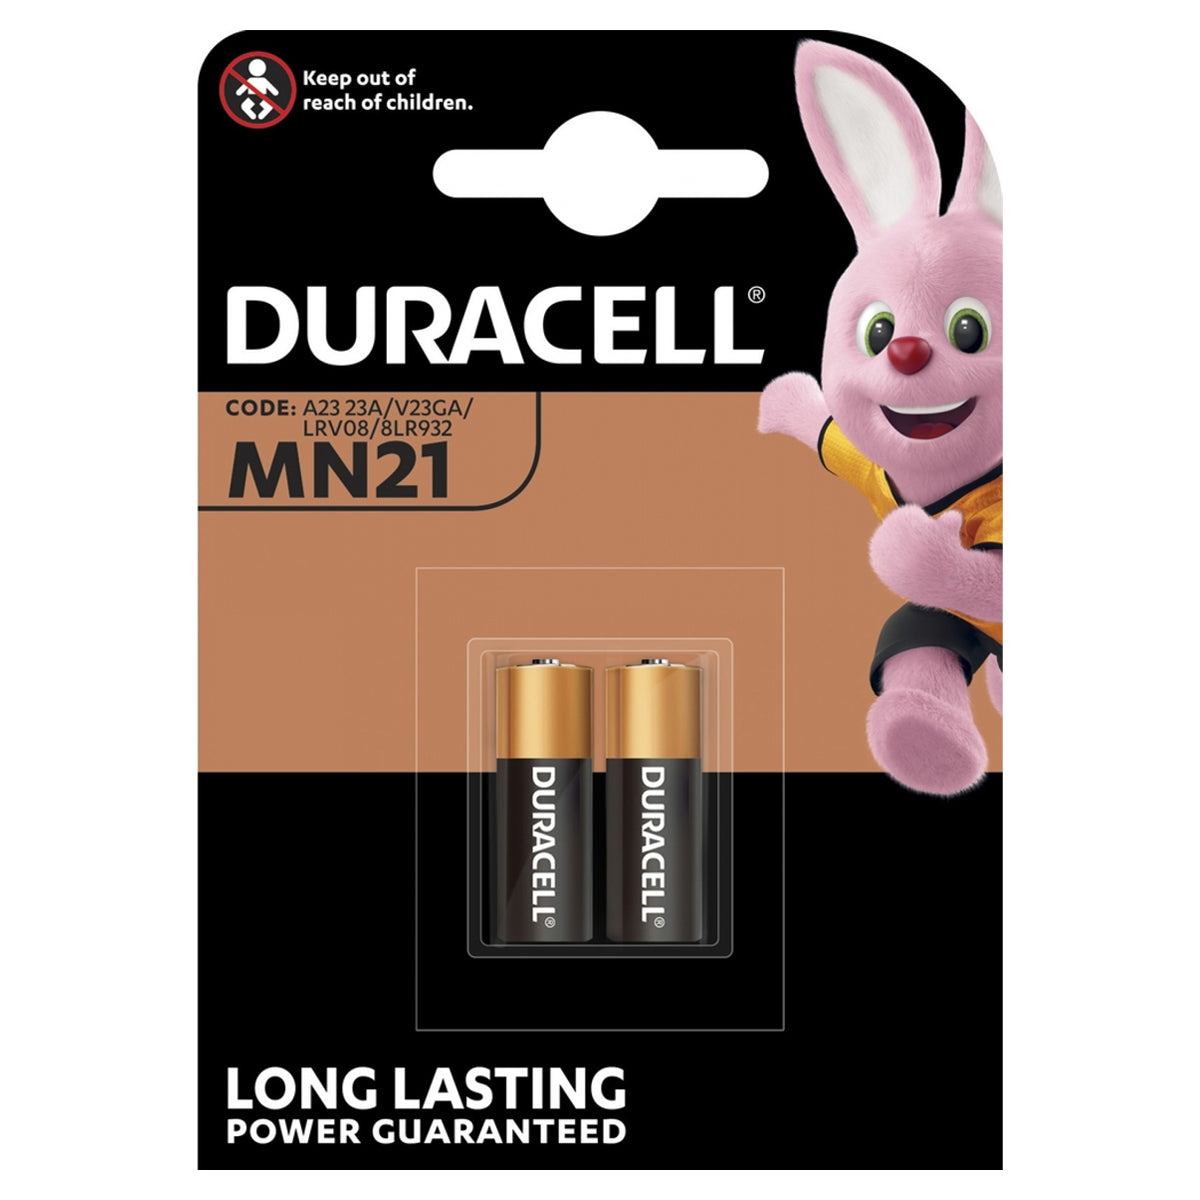 Duracell - MN21 Batteries - 2 Pack - Continental Food Store